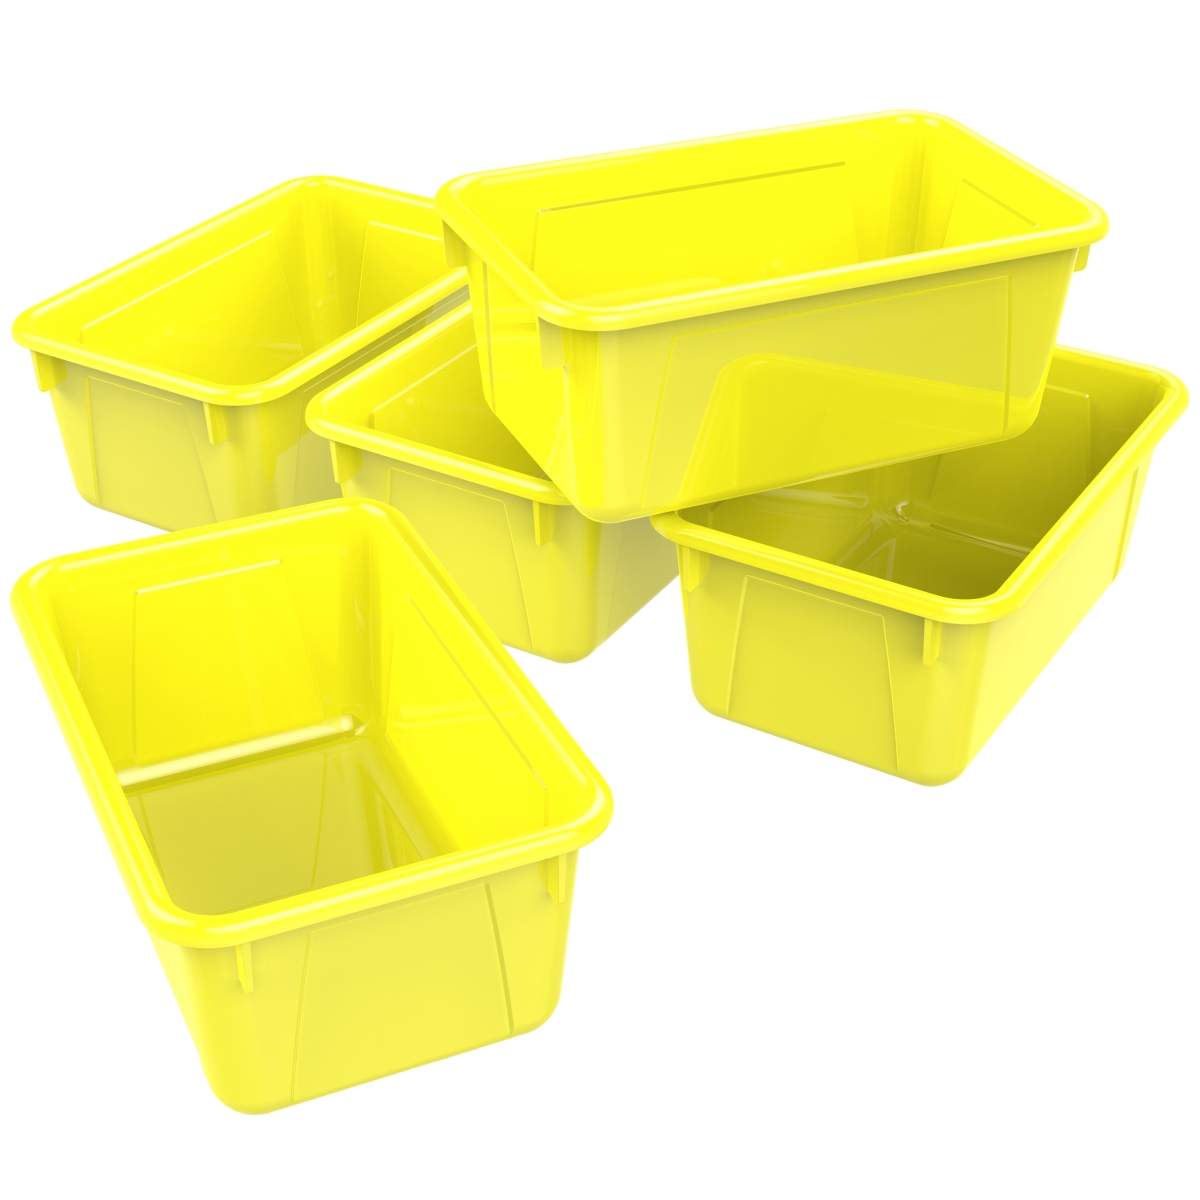 Classroom Small Cubby Bin, Yellow - Pack Of 5